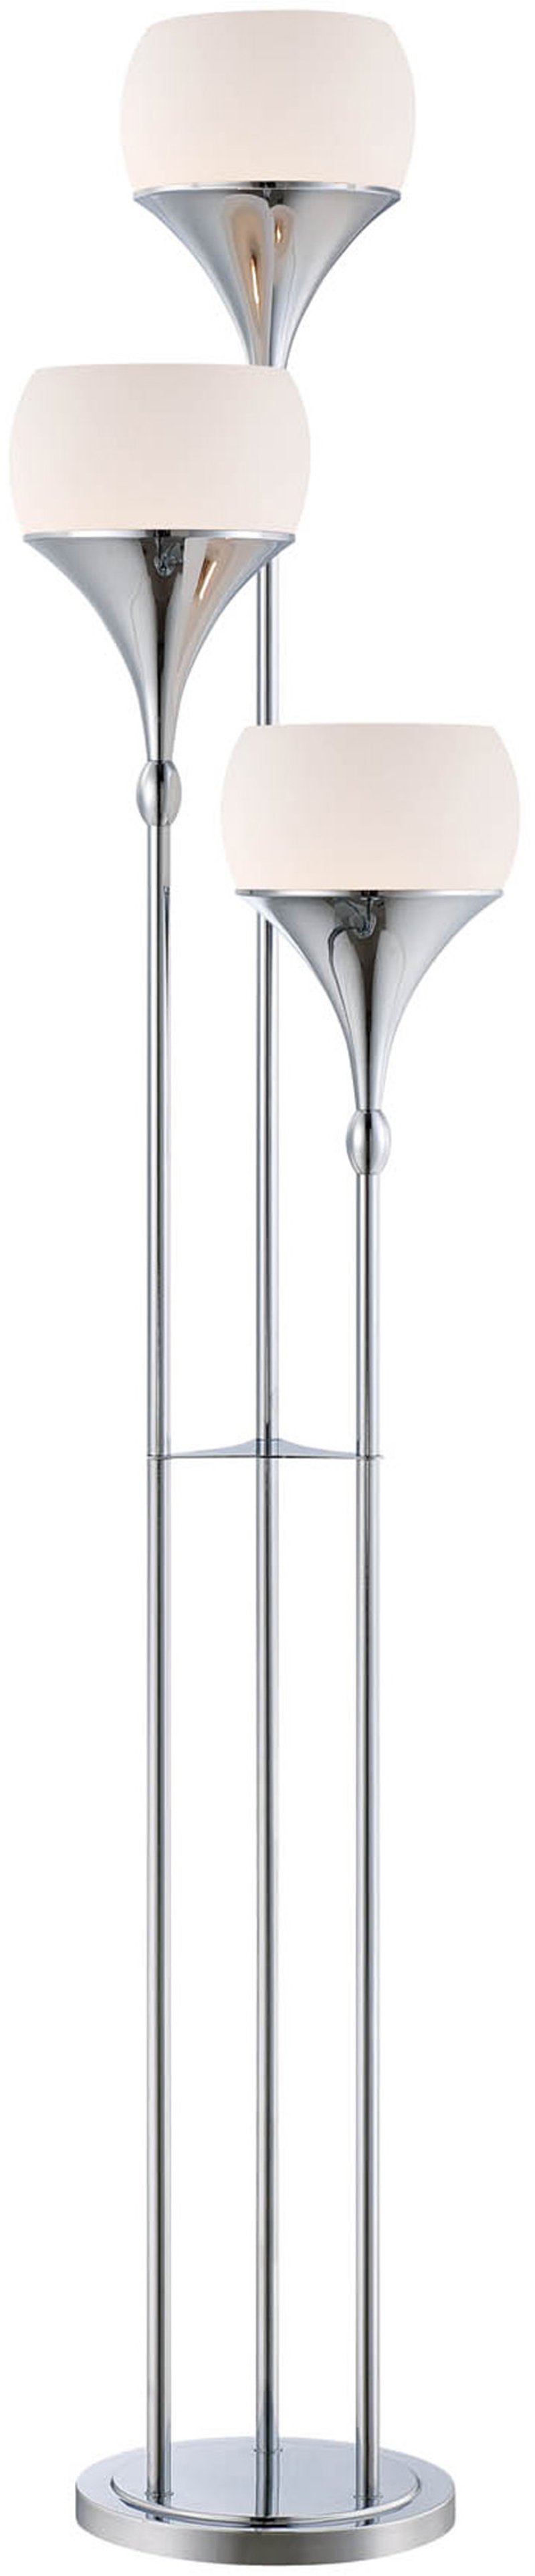 Chrome 3 Lite Floor Lamp With Frosted, Floor Lamp With Glass Shade